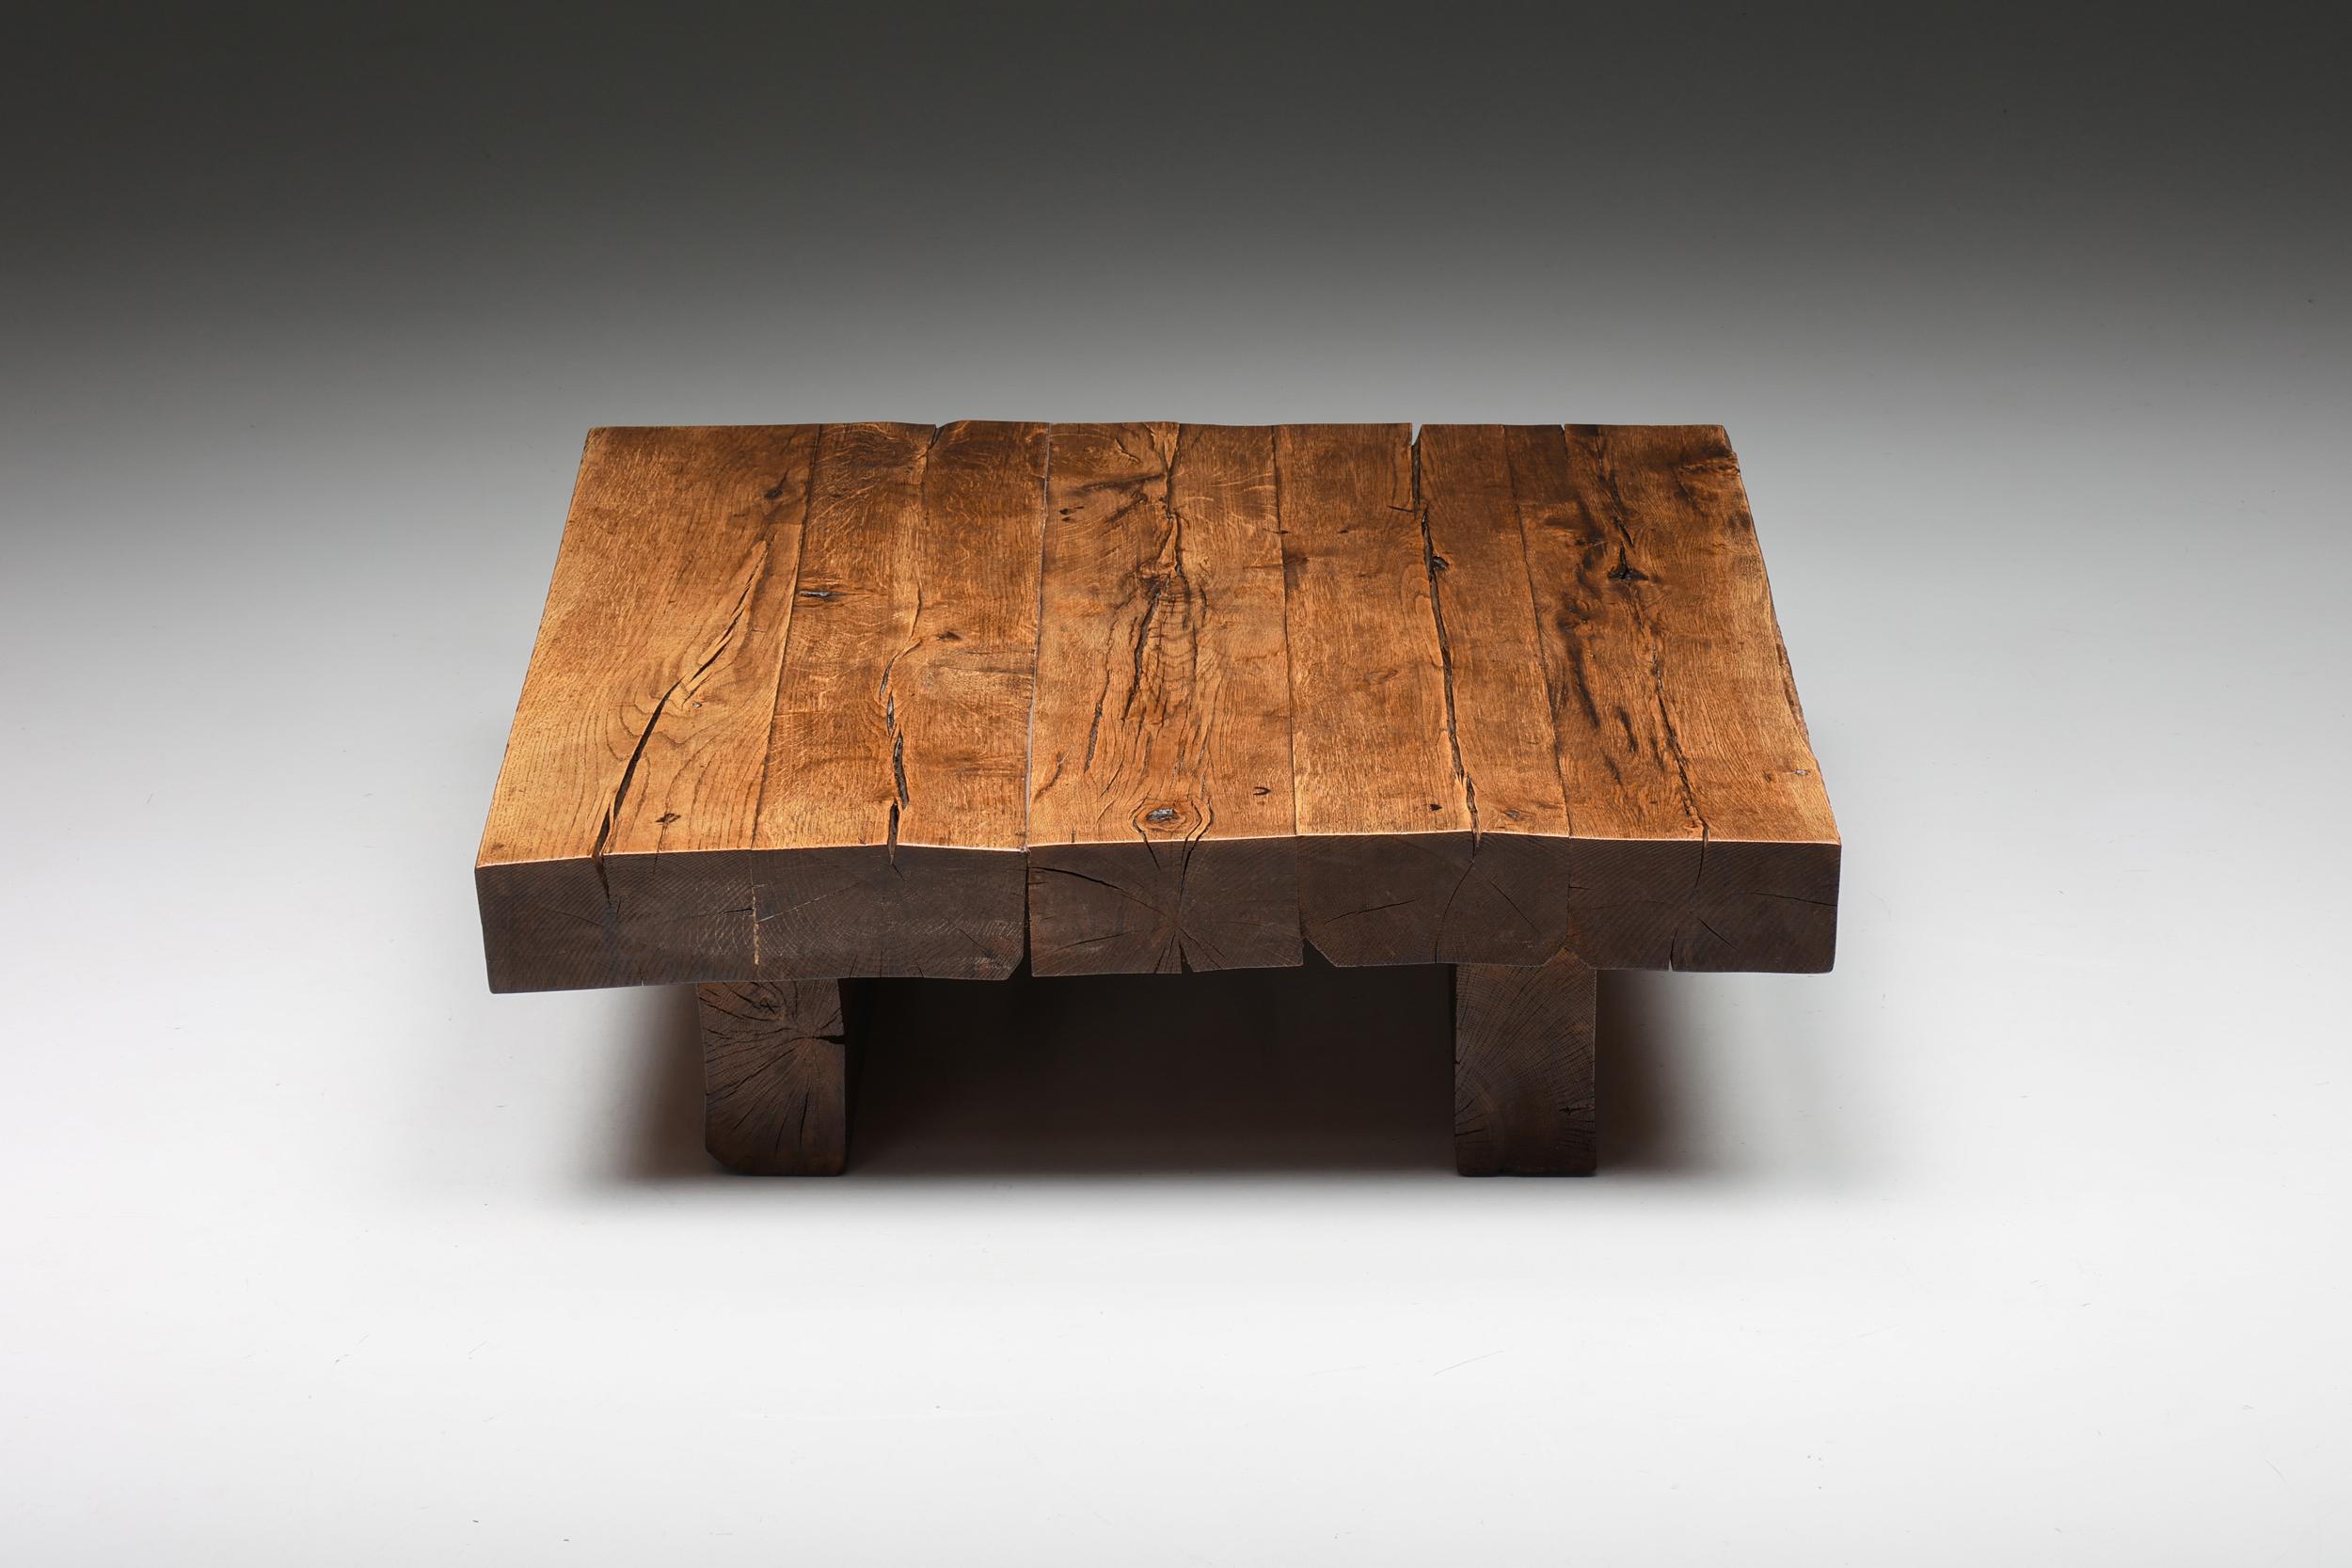 Square Wabi Sabi wooden coffee table, France, 1950's

This rustic square coffee table with a two-legged base is made of solid wood. The square surface provides space for objects like magazines and other curiosities. Can also be used as a side